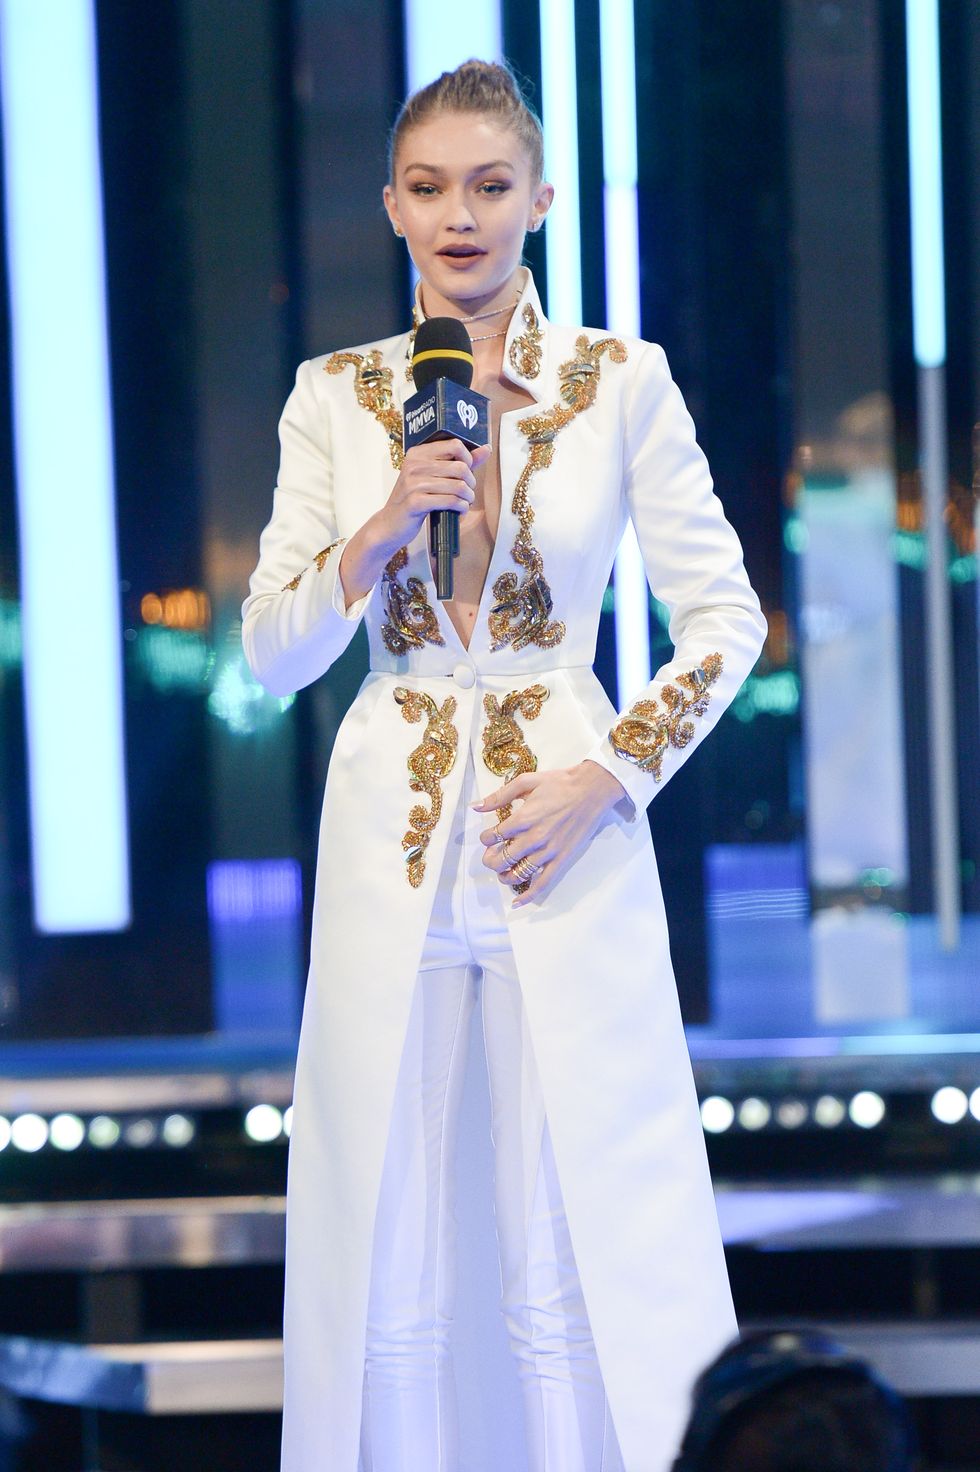 Gigi Hadid presenting at the iHeartRadio Much Music Awards 2016